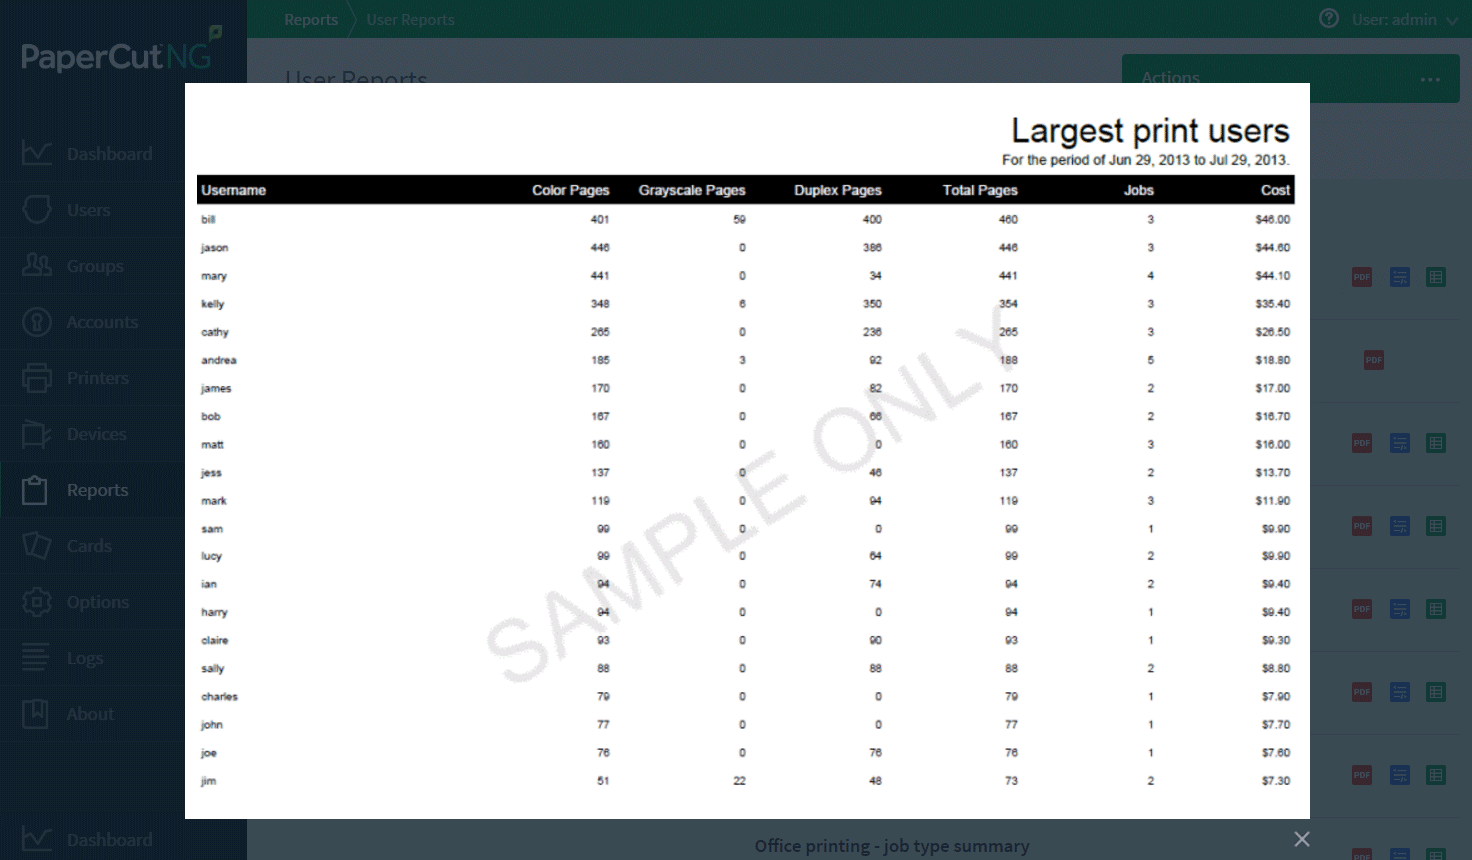 Sample of the "Largest print users" report